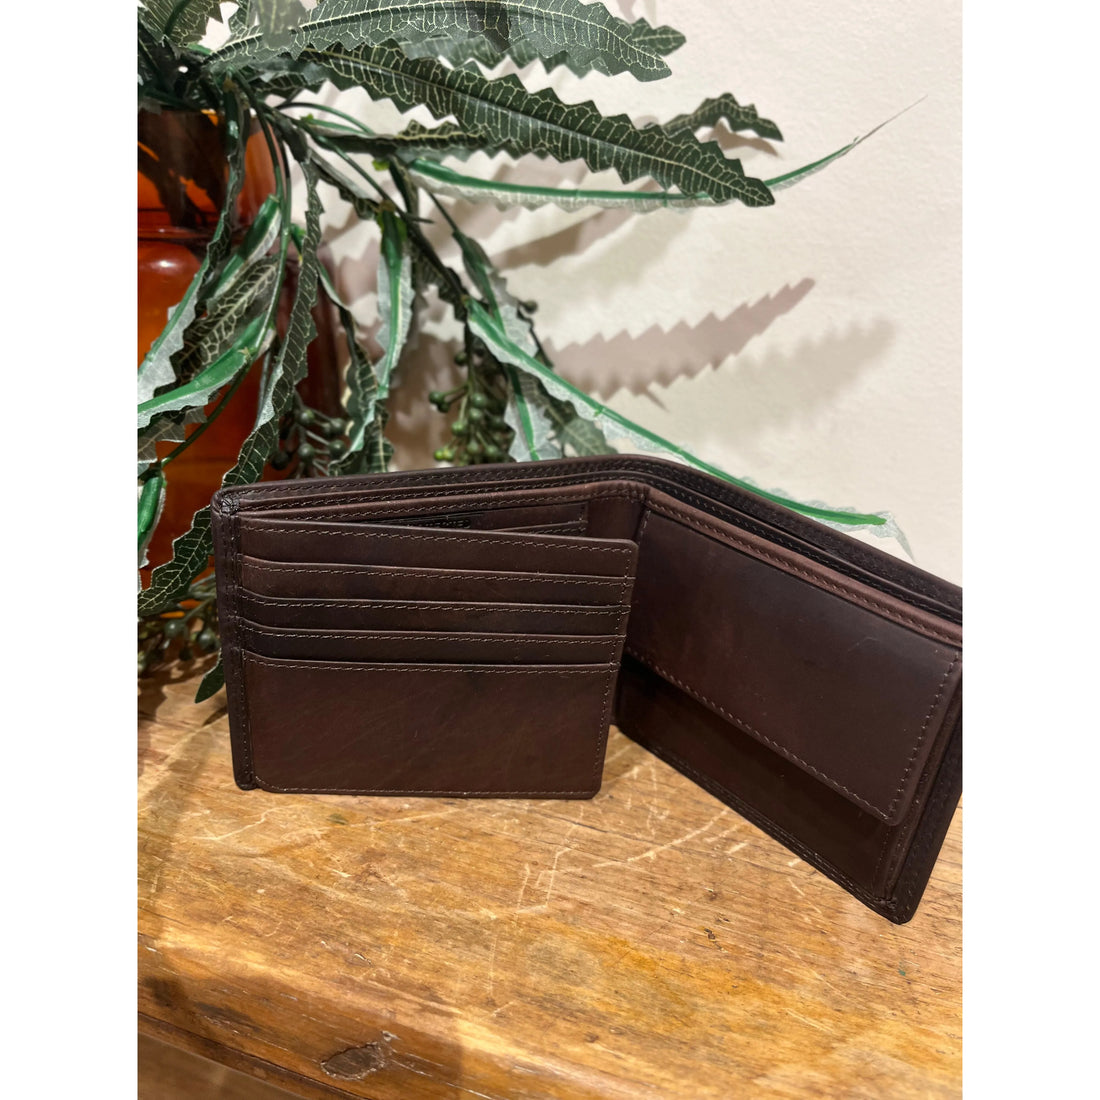 Chocolate Plain Leather Wallet 